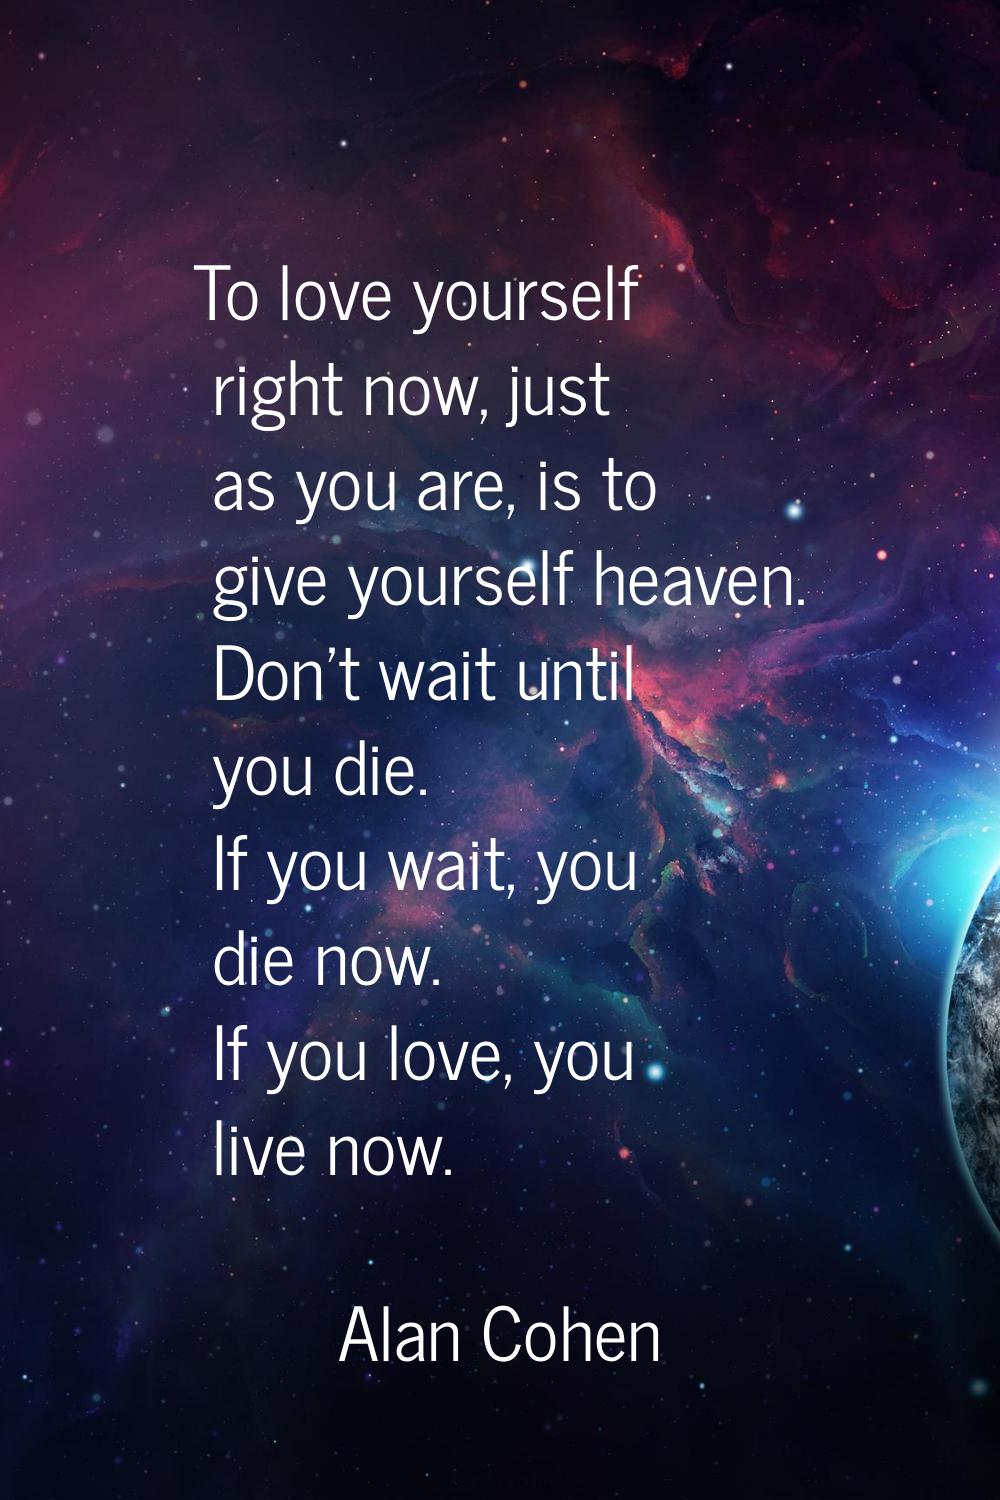 To love yourself right now, just as you are, is to give yourself heaven. Don't wait until you die. 